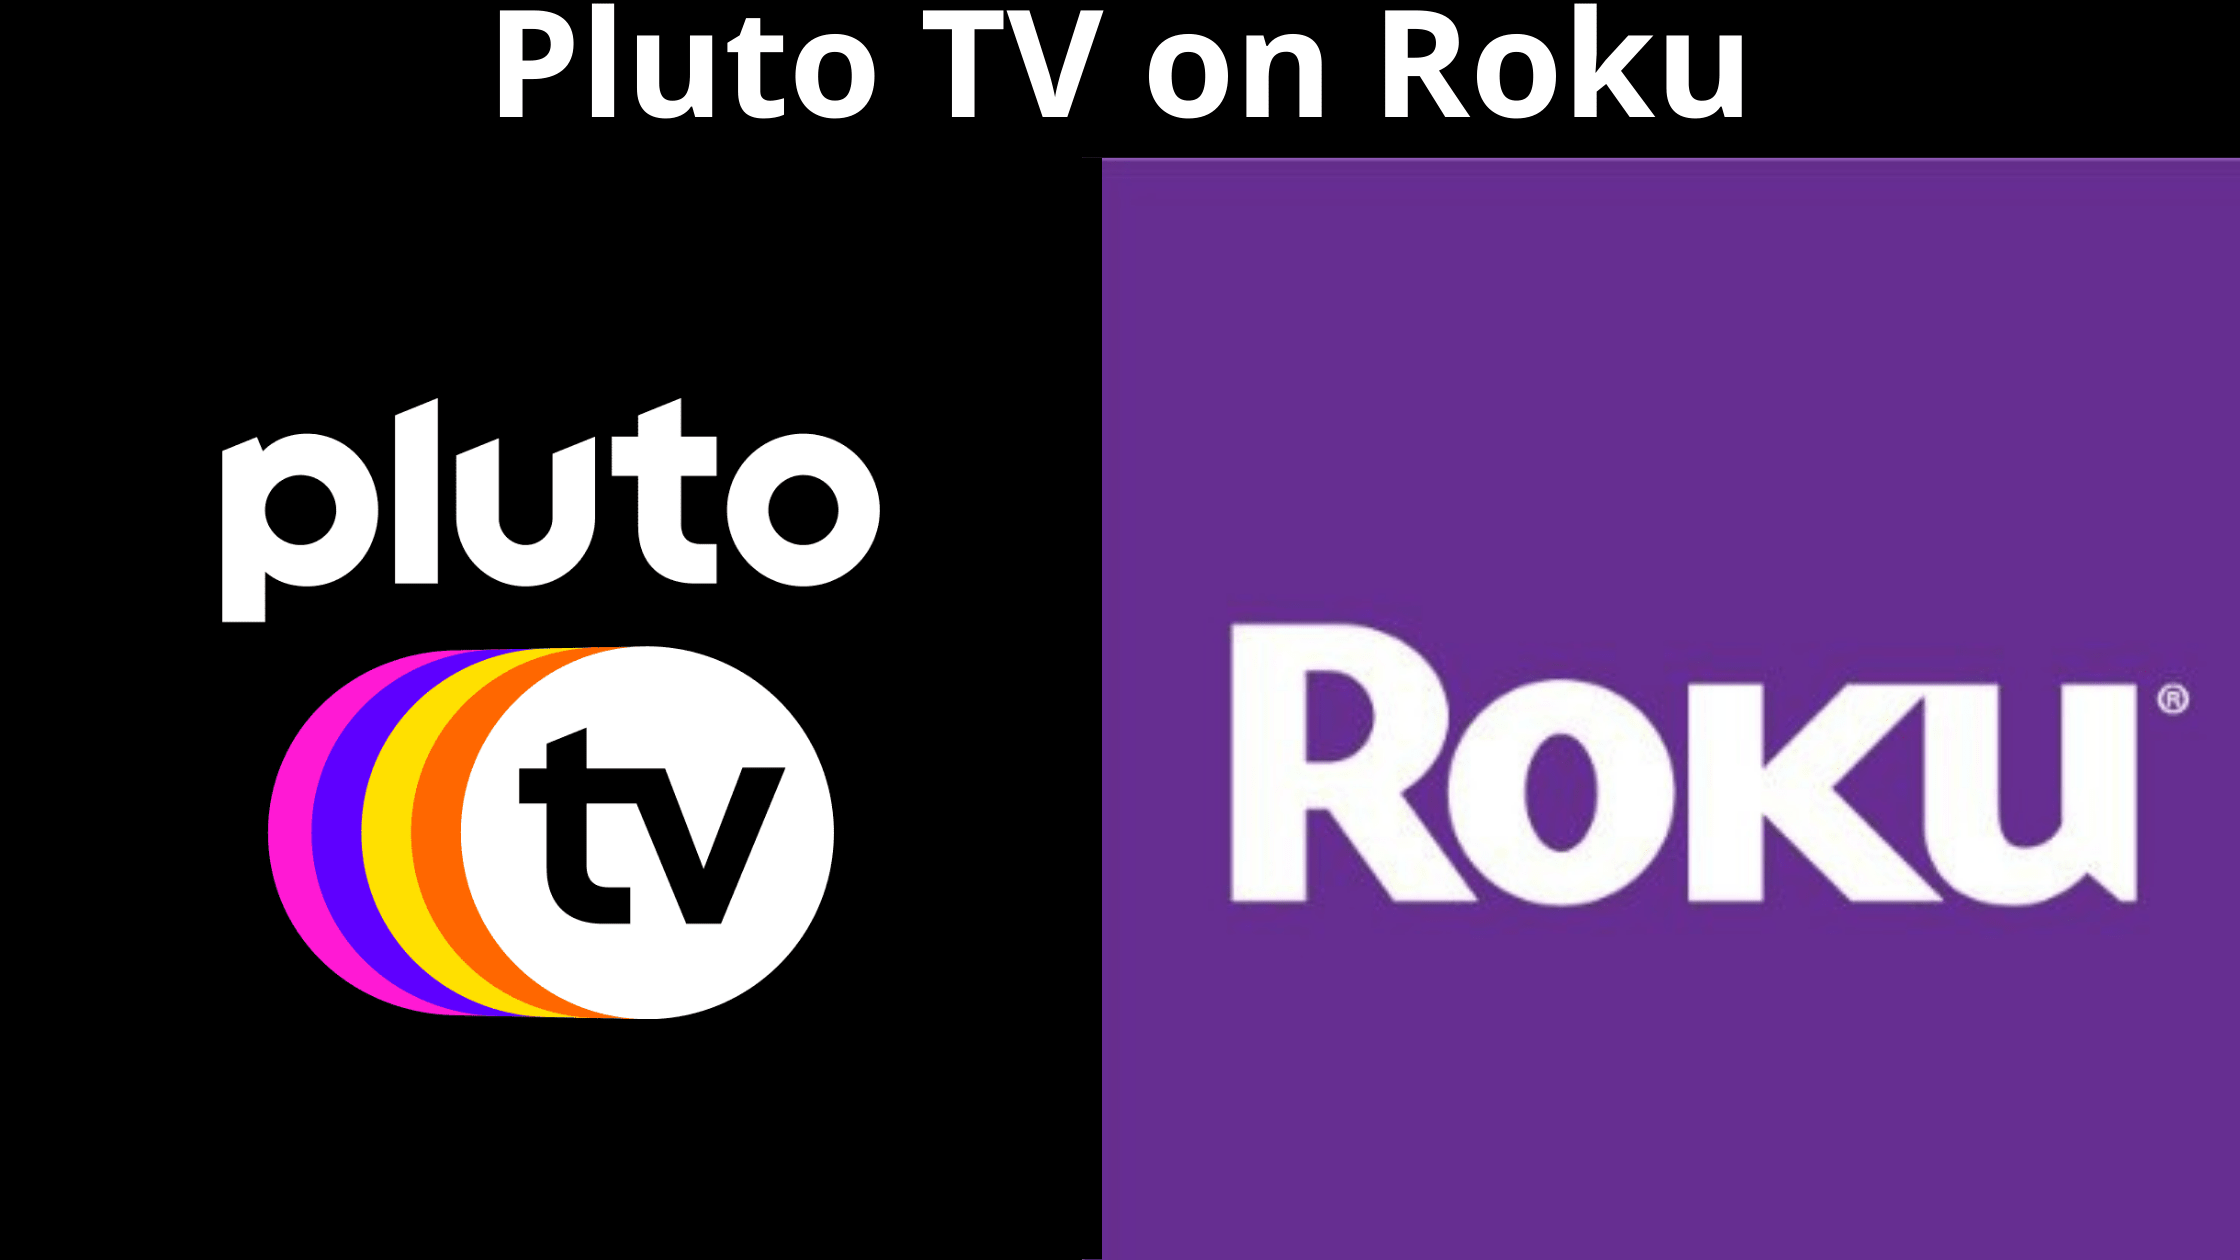 How To Get Pluto Tv On Roku Simple Guide 2021 - Tech Thanos